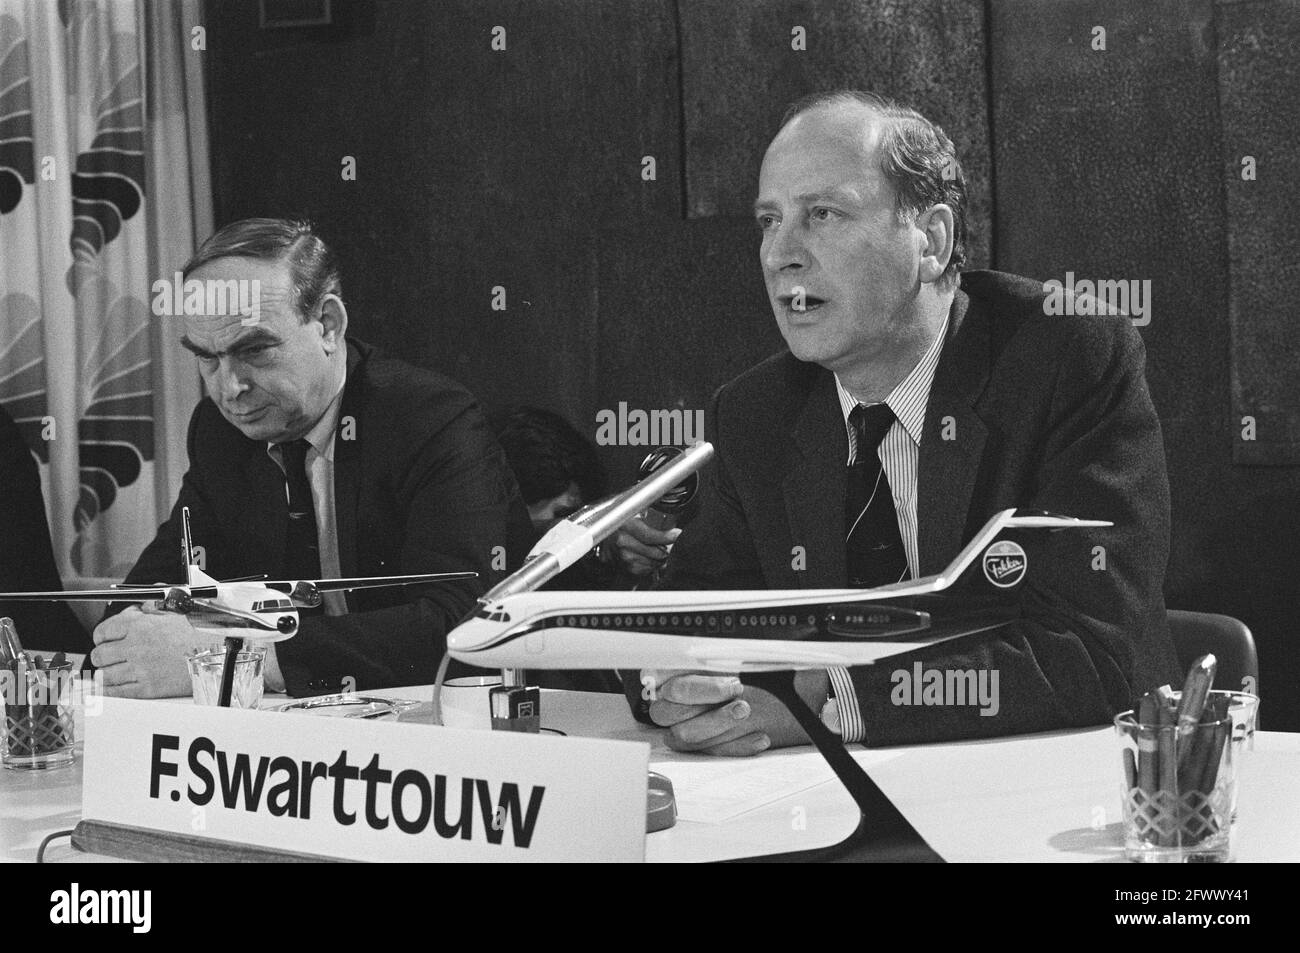 Press conference of aircraft factory Fokker regarding end of cooperation with Mc Donald Douglas in MDF 100 project . Swarttouw and D. Krook, February 8, 1982, press conferences, The Netherlands, 20th century press agency photo, news to remember, documentary, historic photography 1945-1990, visual stories, human history of the Twentieth Century, capturing moments in time Stock Photo